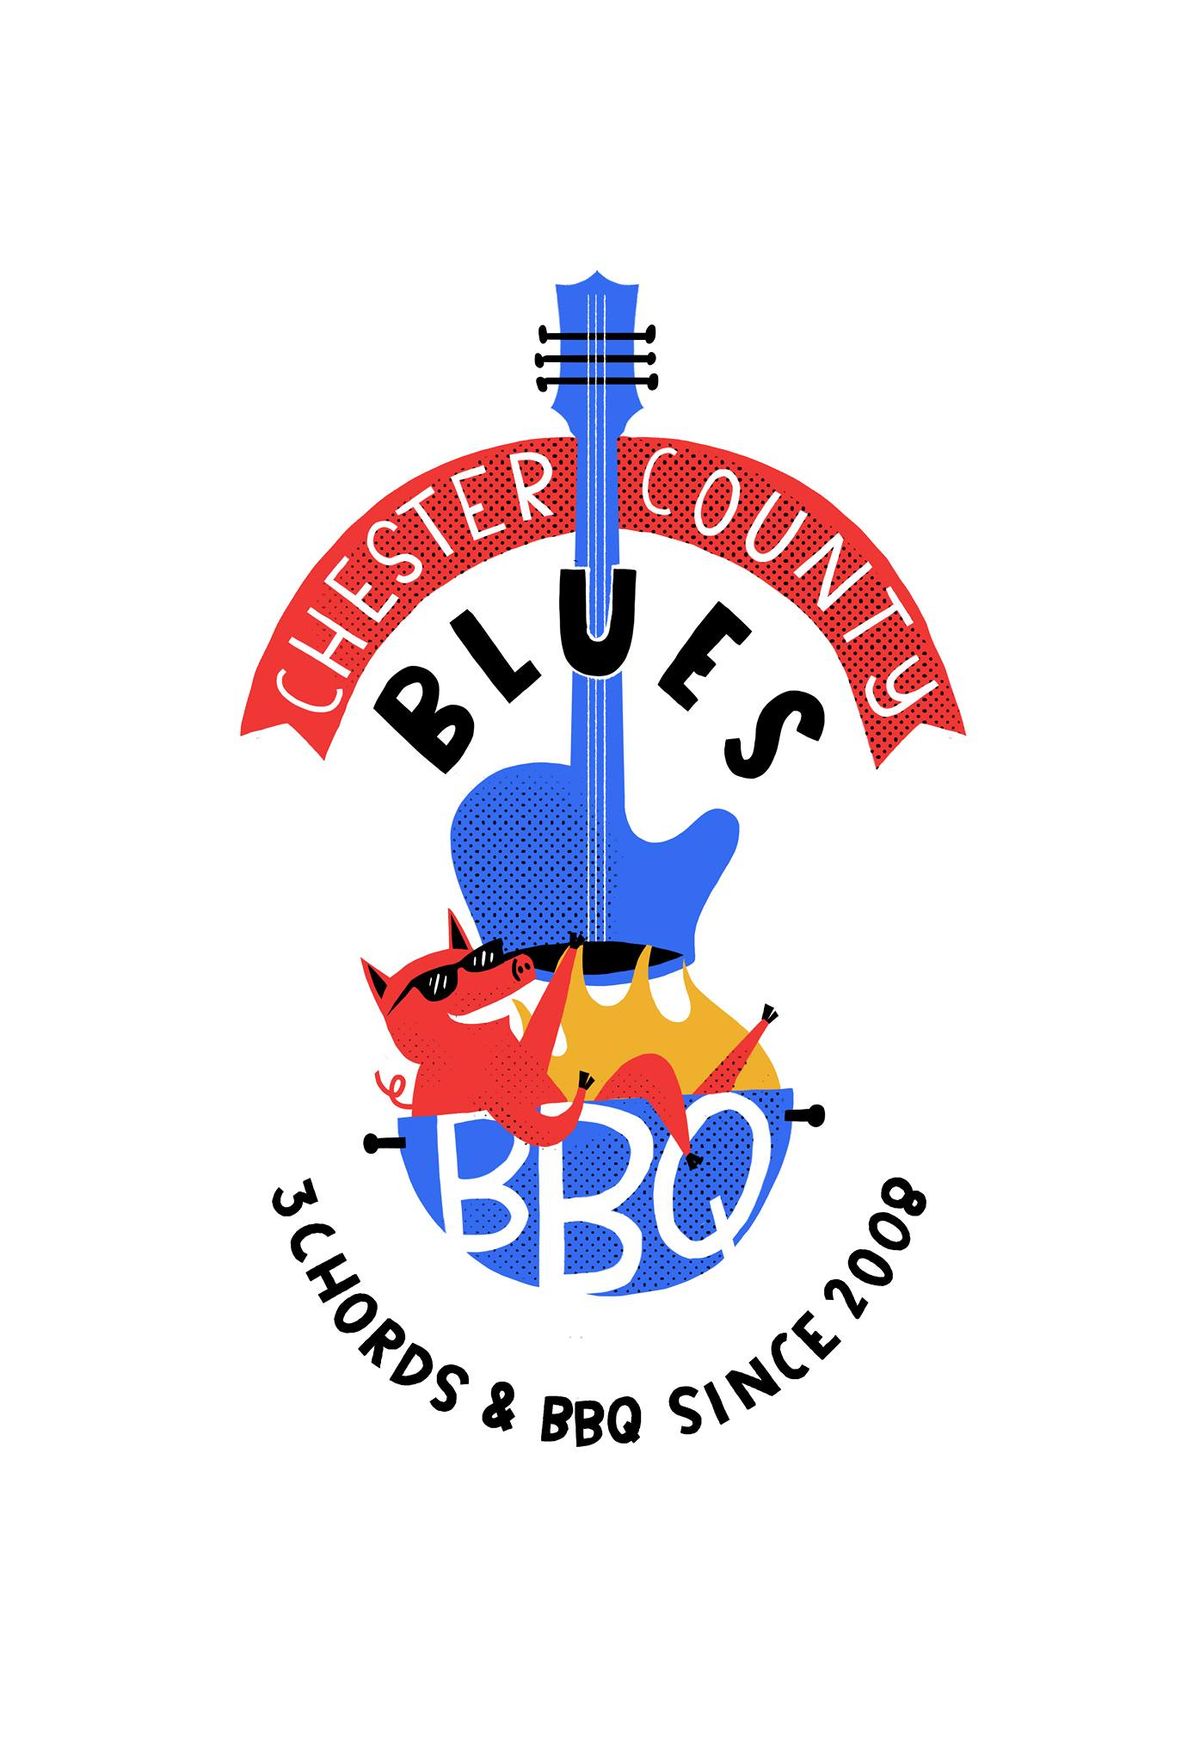 12th Annual Chester County Blues Barbecue